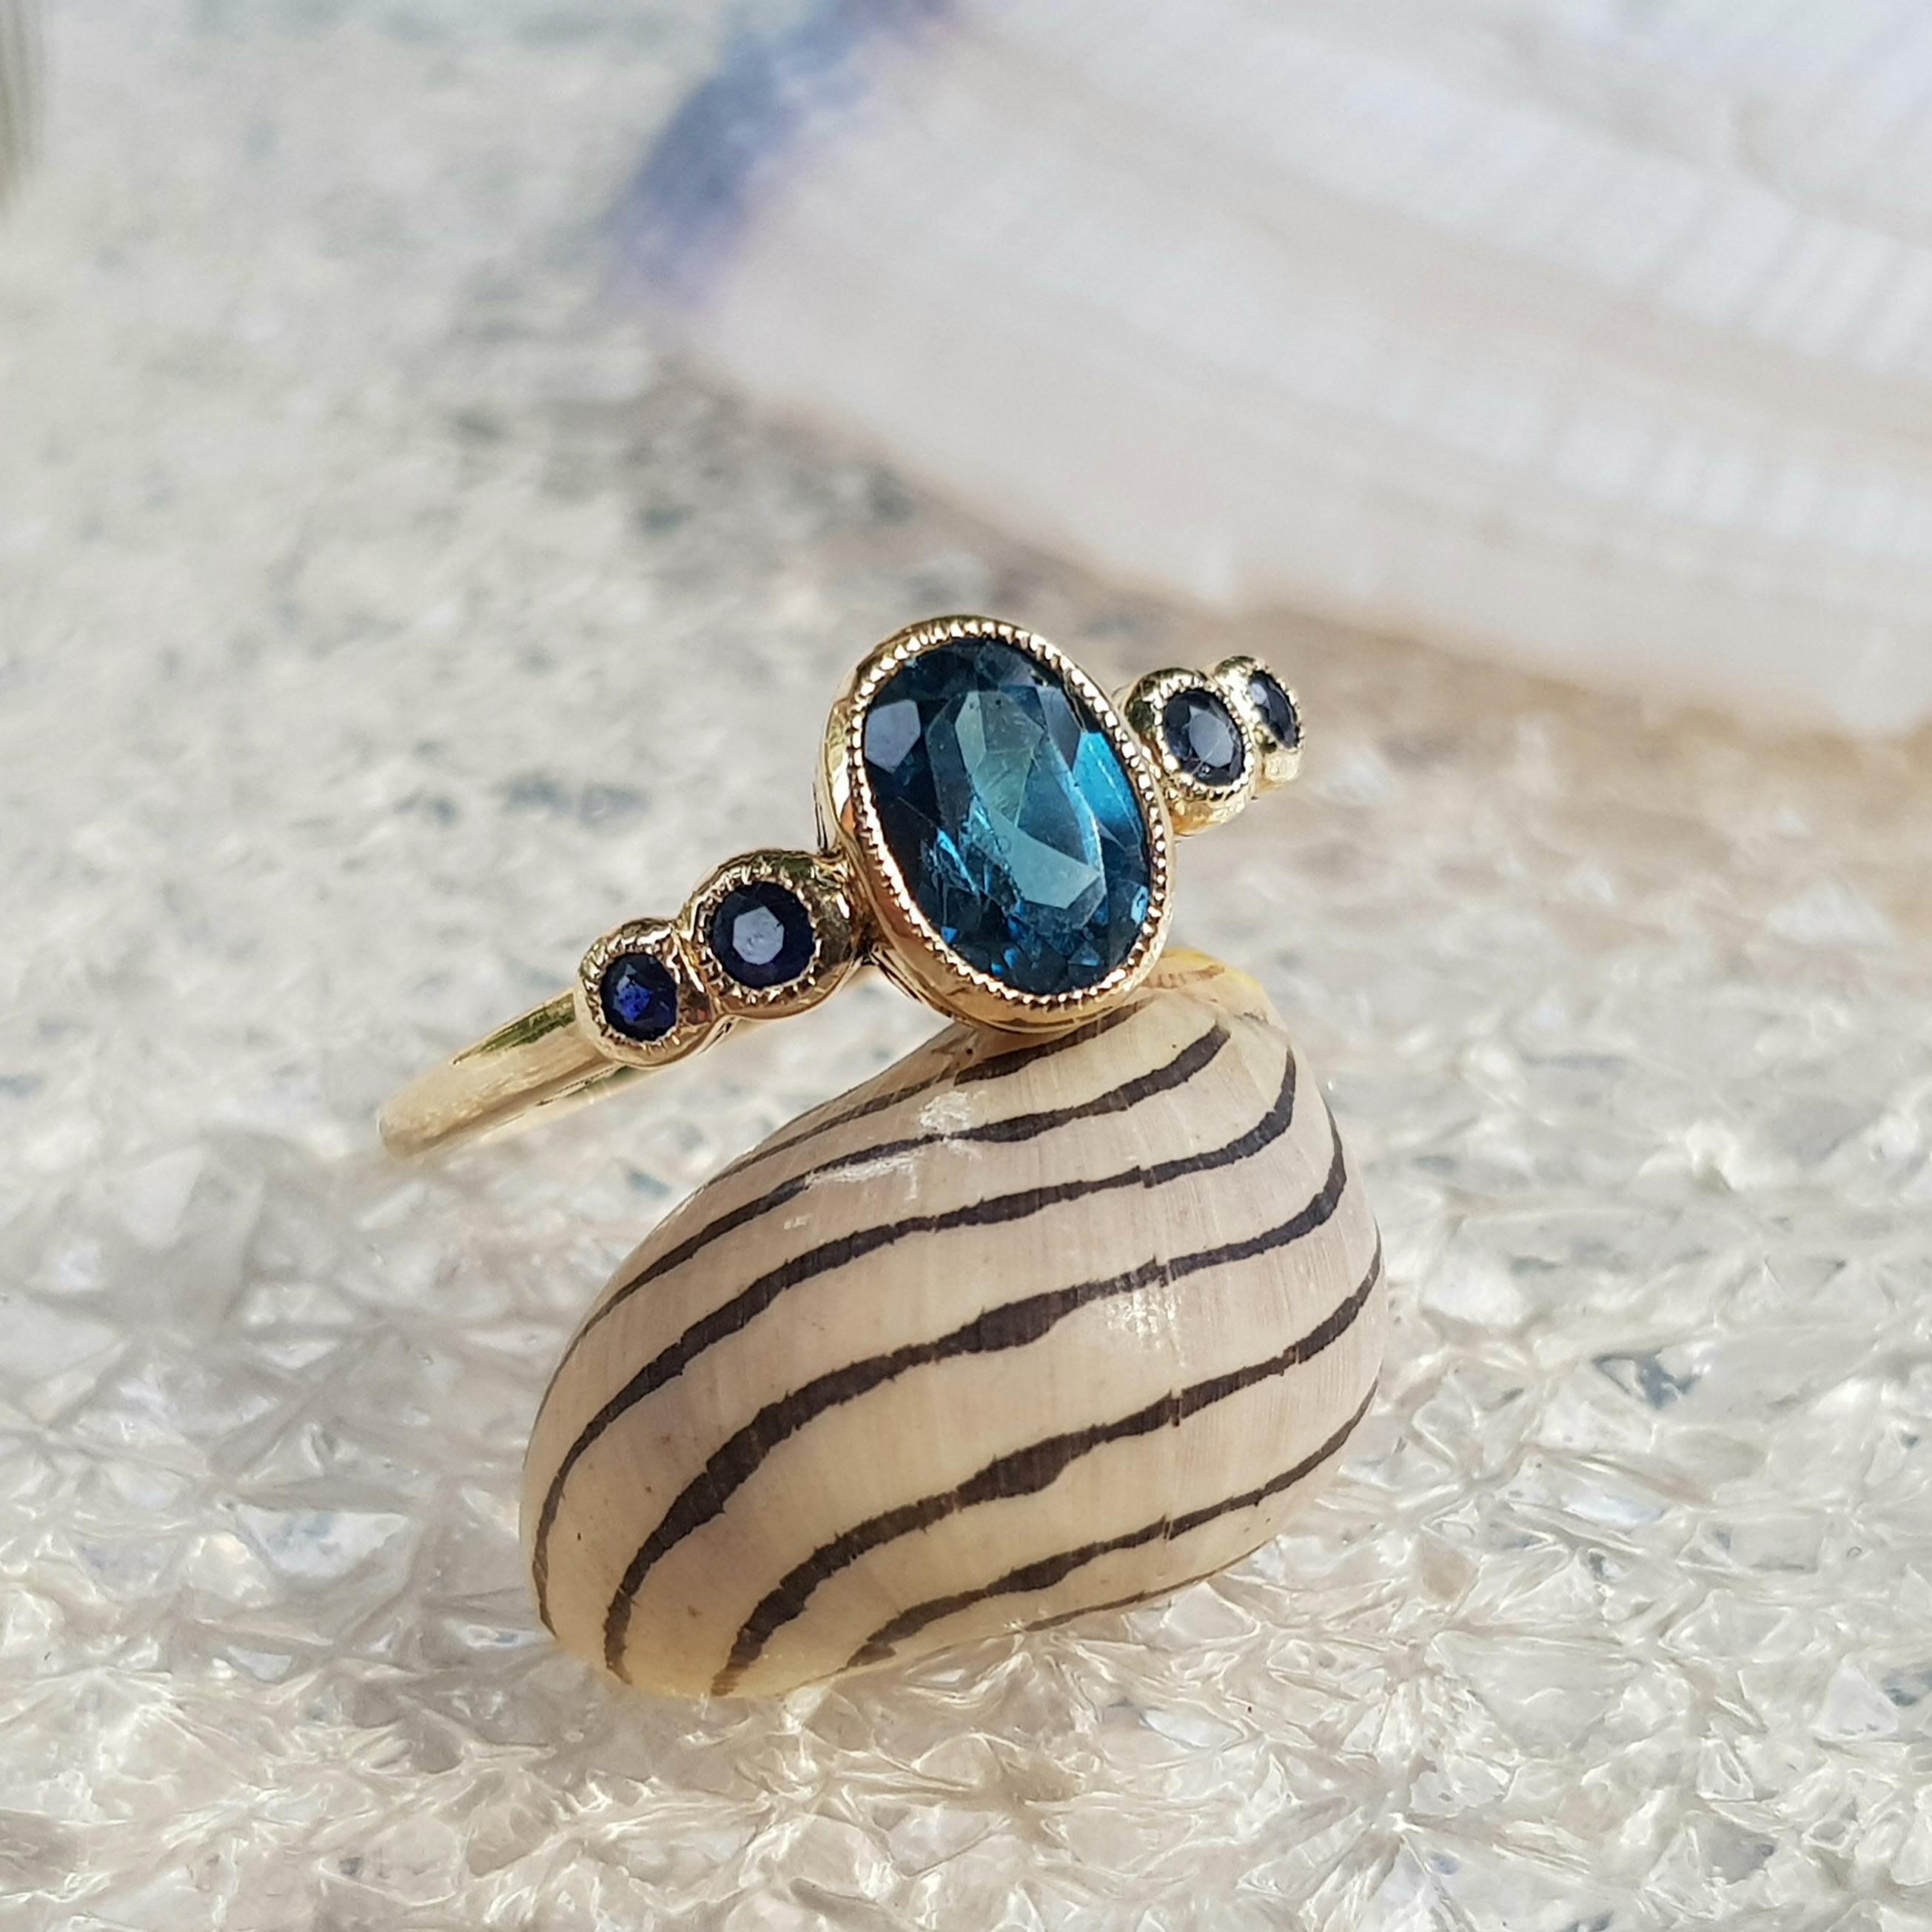 Simple and straightforward, this ring showcases sophisticated style. Fashioned in 9k gold, this ring showcases a stunning 7 x 5 mm. oval shaped London blue topaz and round sapphires on shoulders. A great look anytime, this ring finished with a